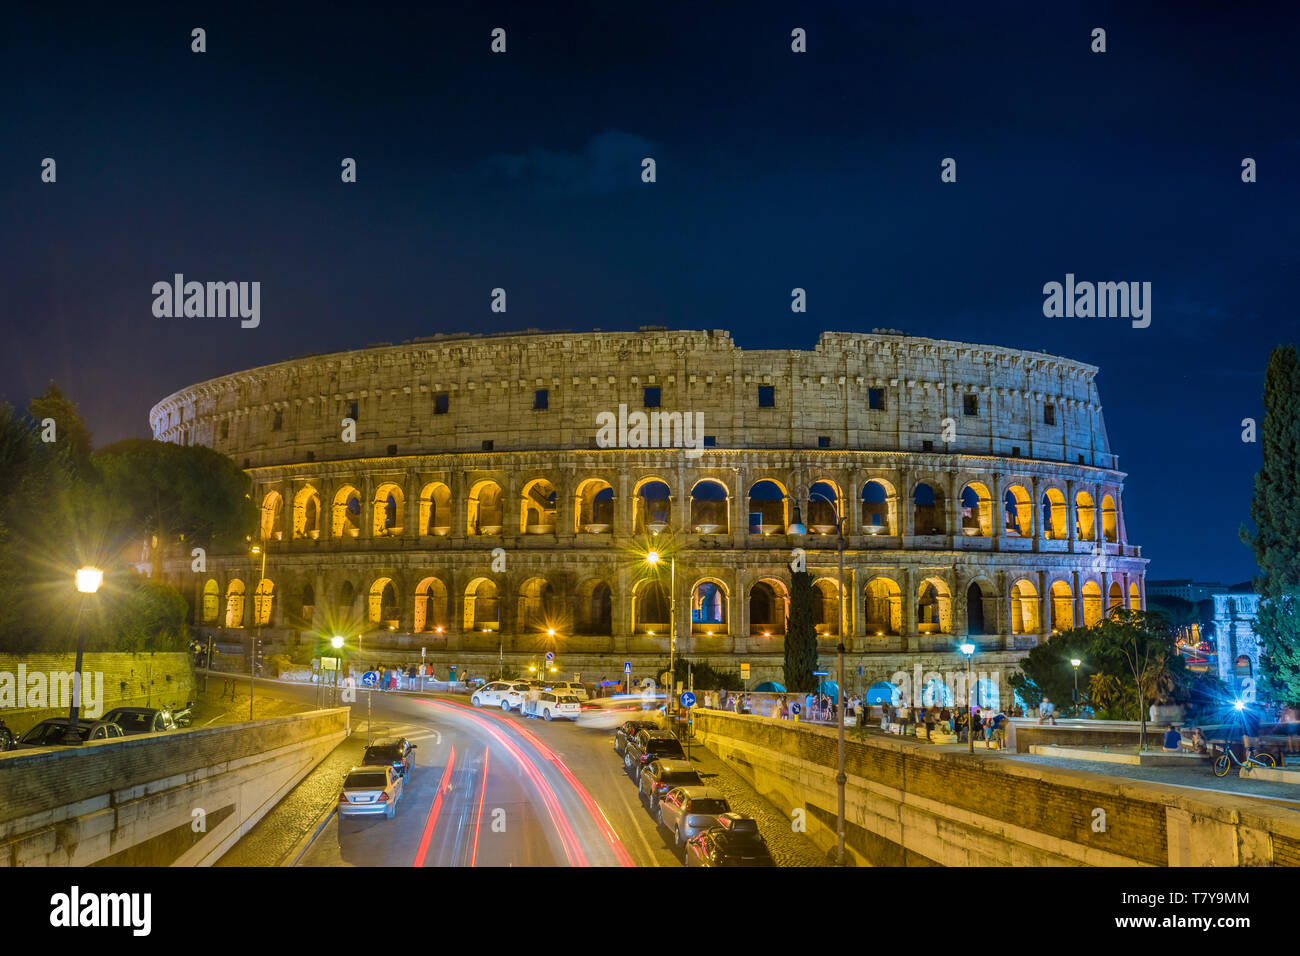 The Grand Colosseum the largest amphitheater built by the Roman Empire at night in Rome - Italy Stock Photo